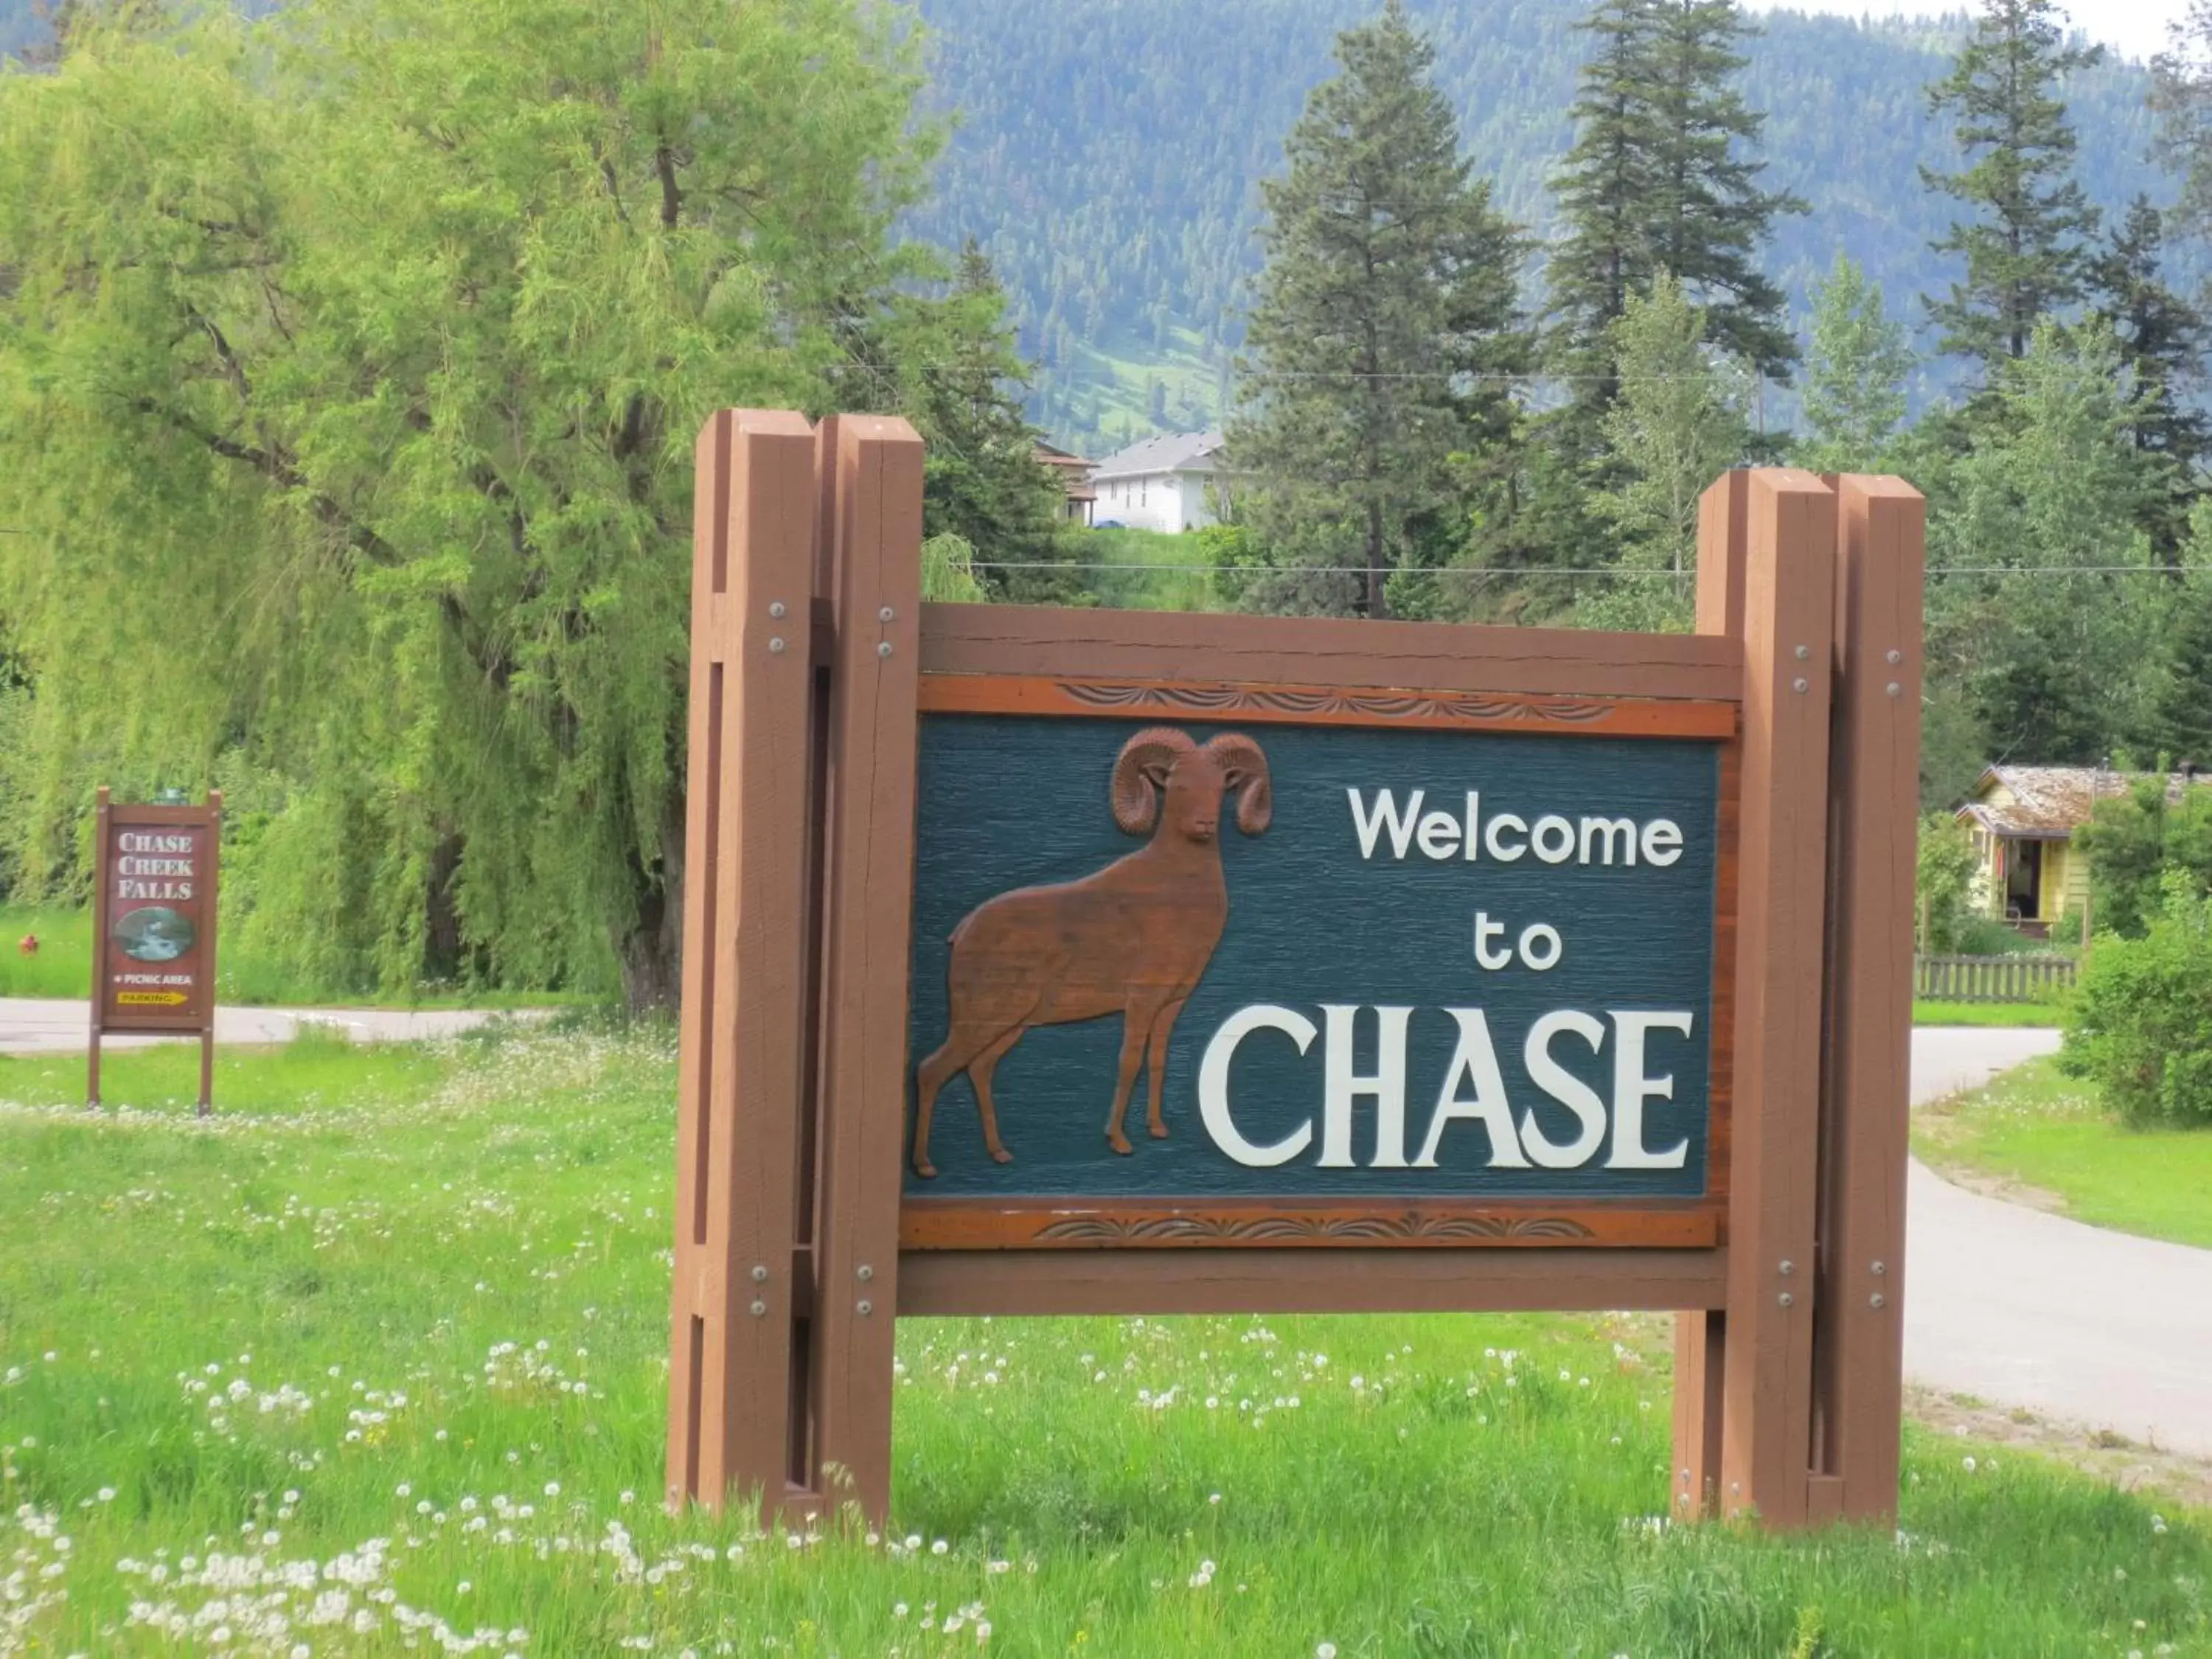 Area and facilities in Chase Country Inn